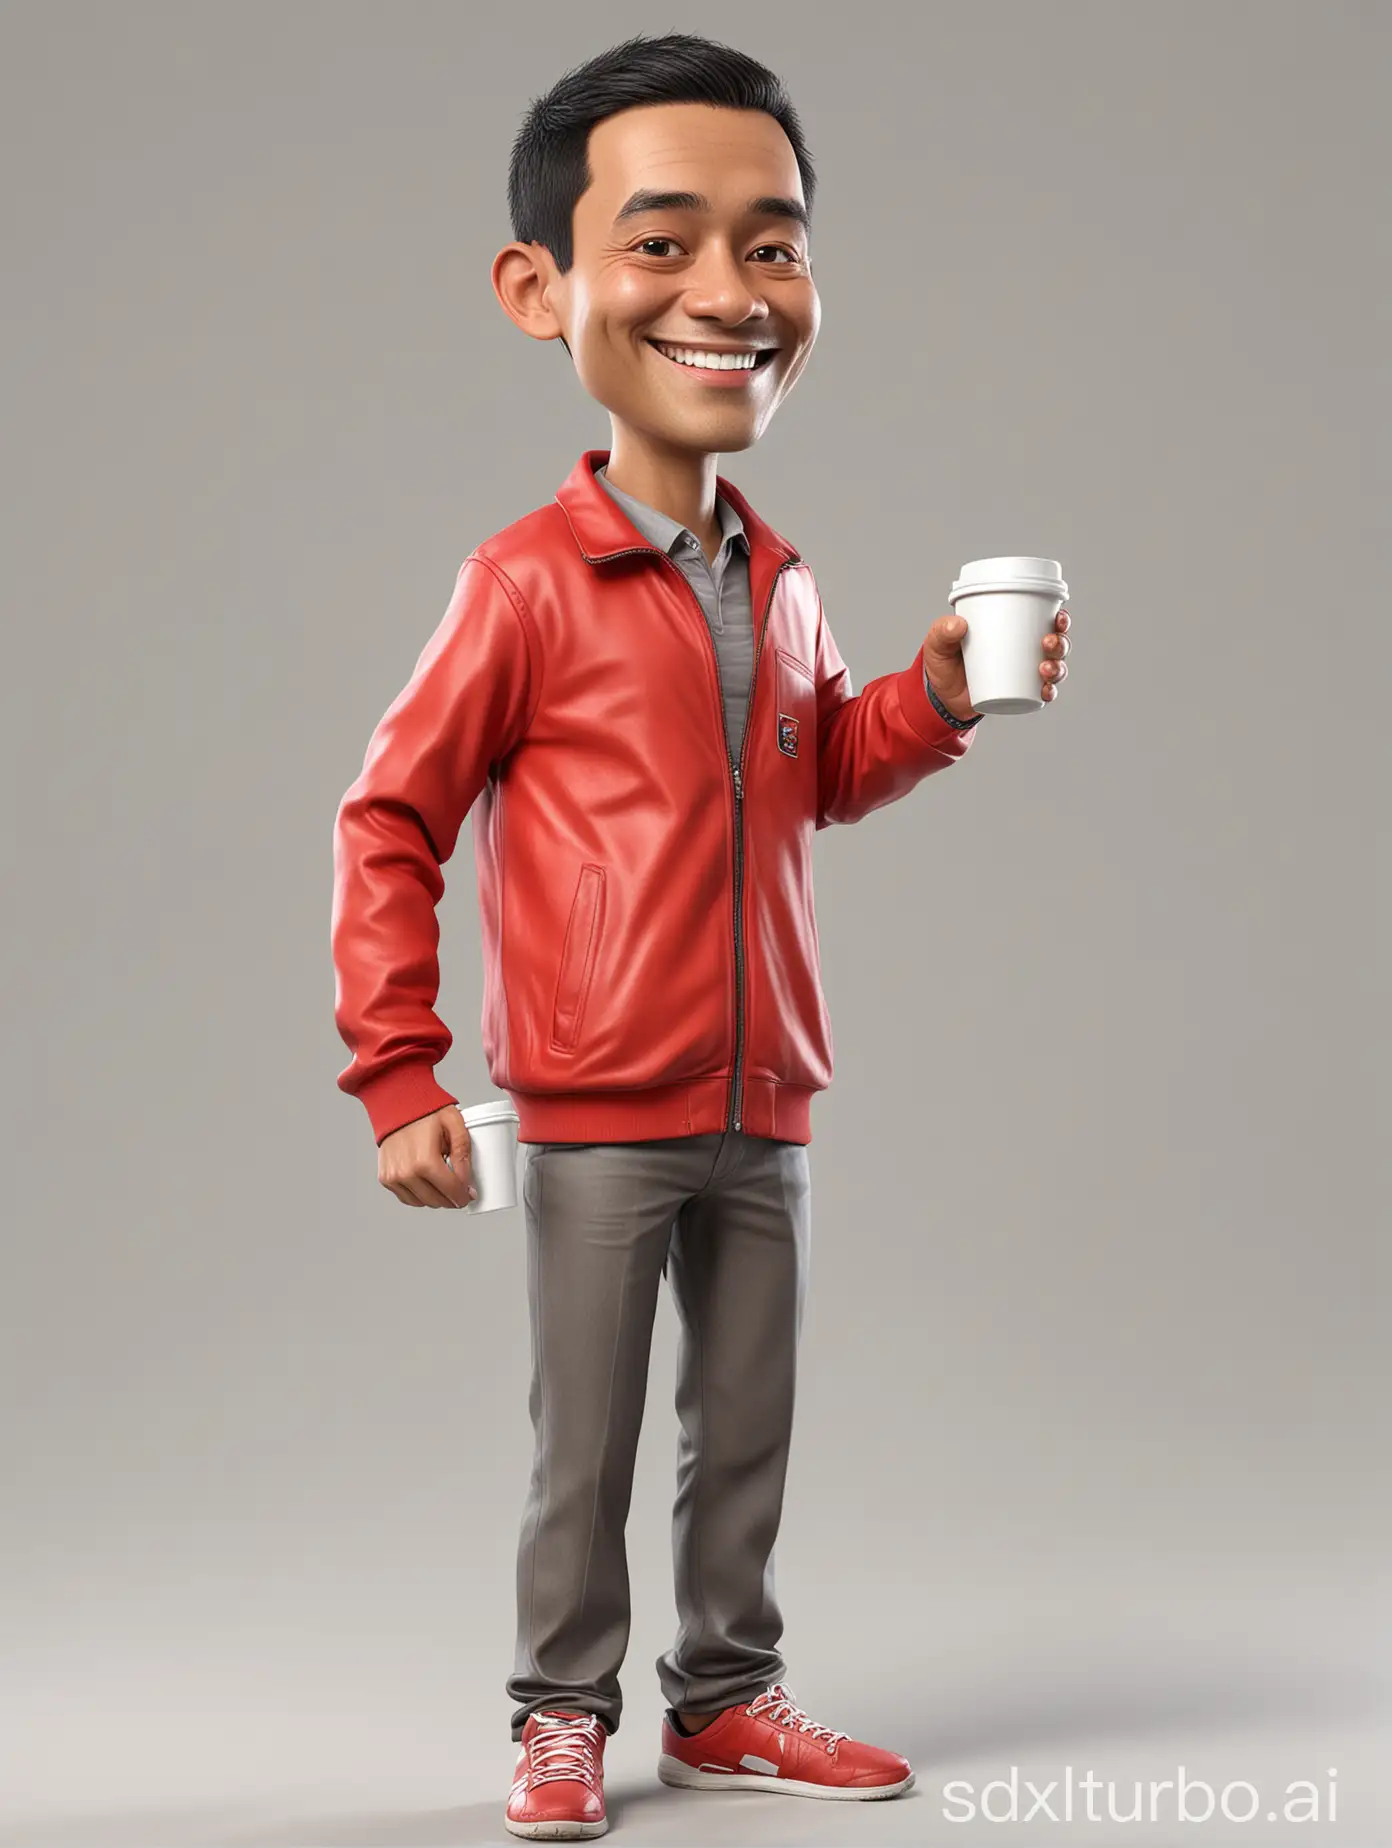 Full body, Caricature of Indonesian man, medium body size, thin hair, smiling expression, standing, holding a cup filled with coffee, wearing a red sport jacket, white background. Big head size. Realistic. 3D. HD